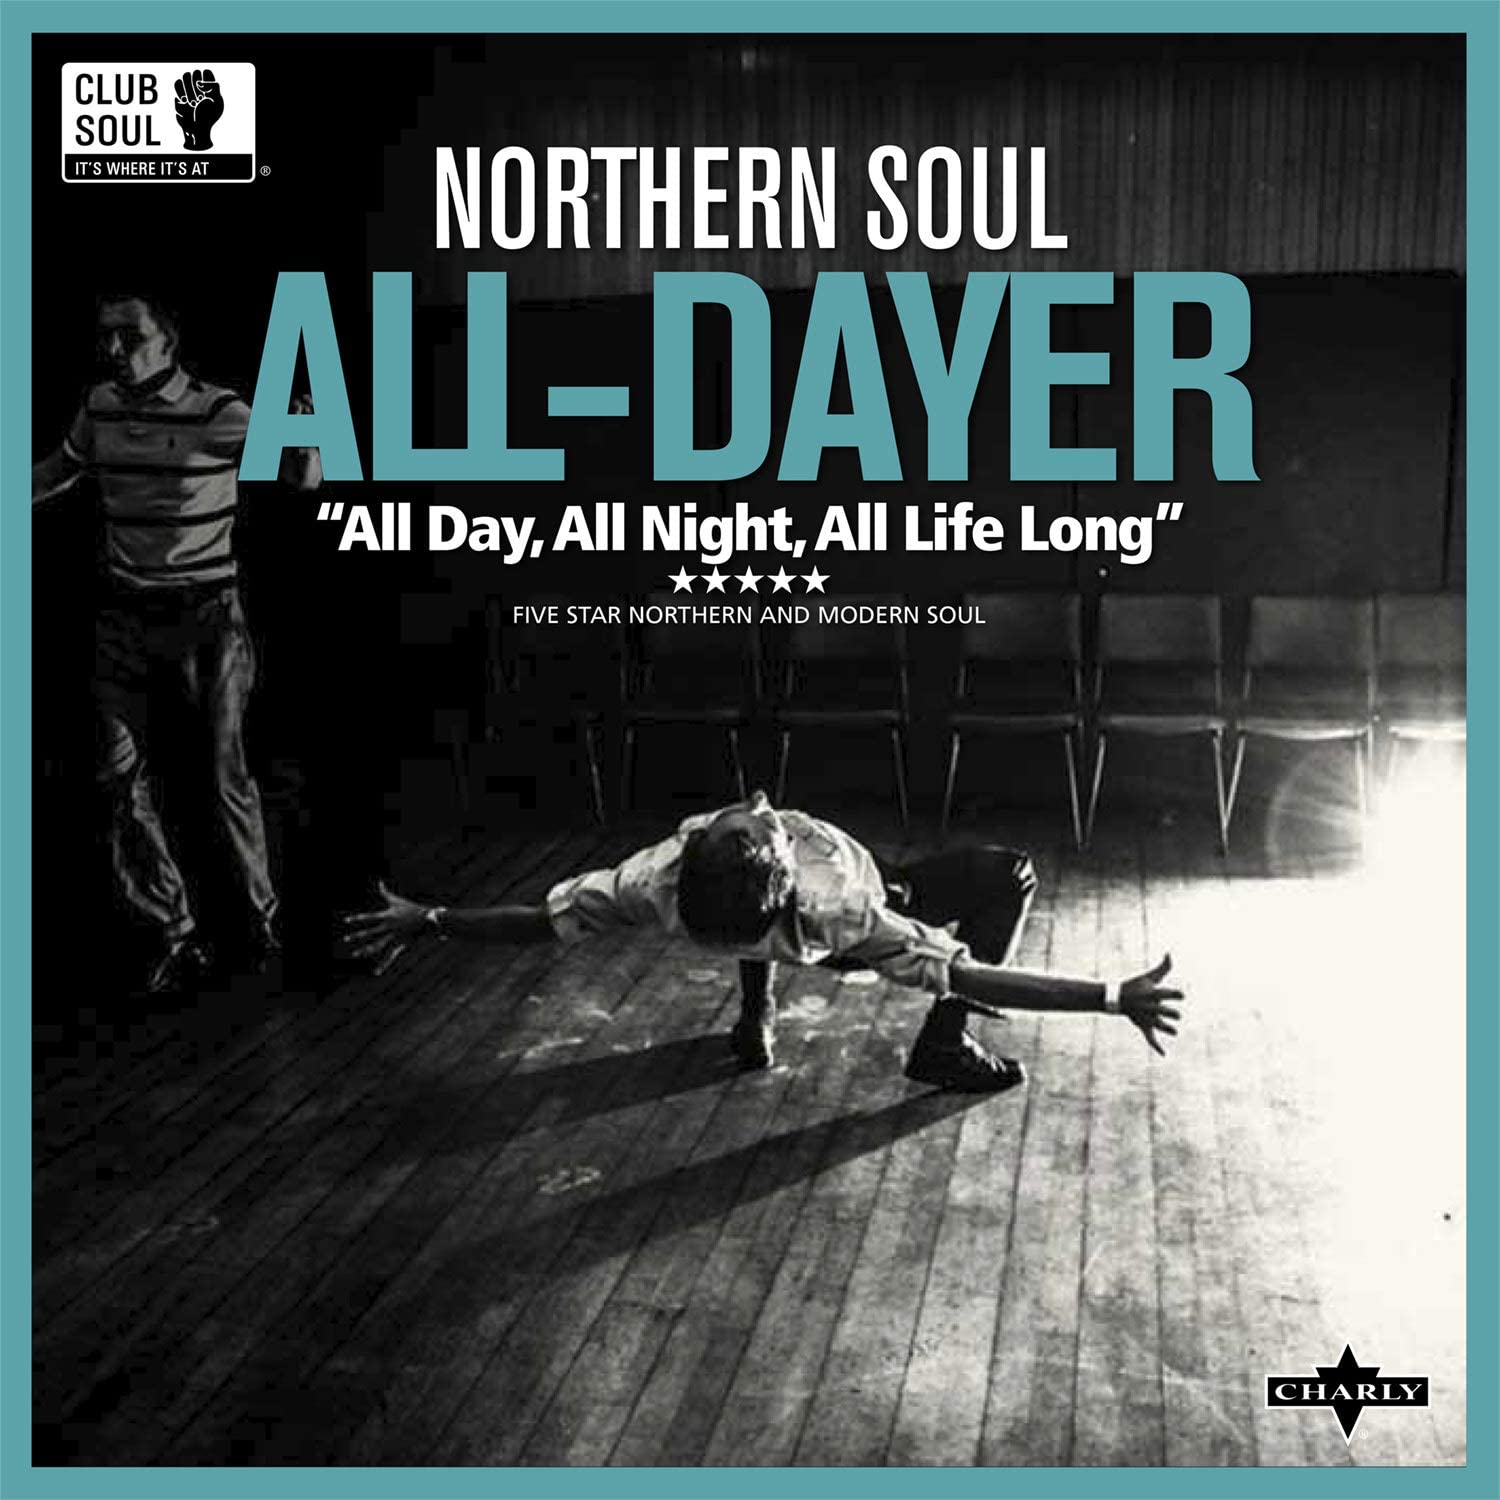 Northern Soul - All-Dayer